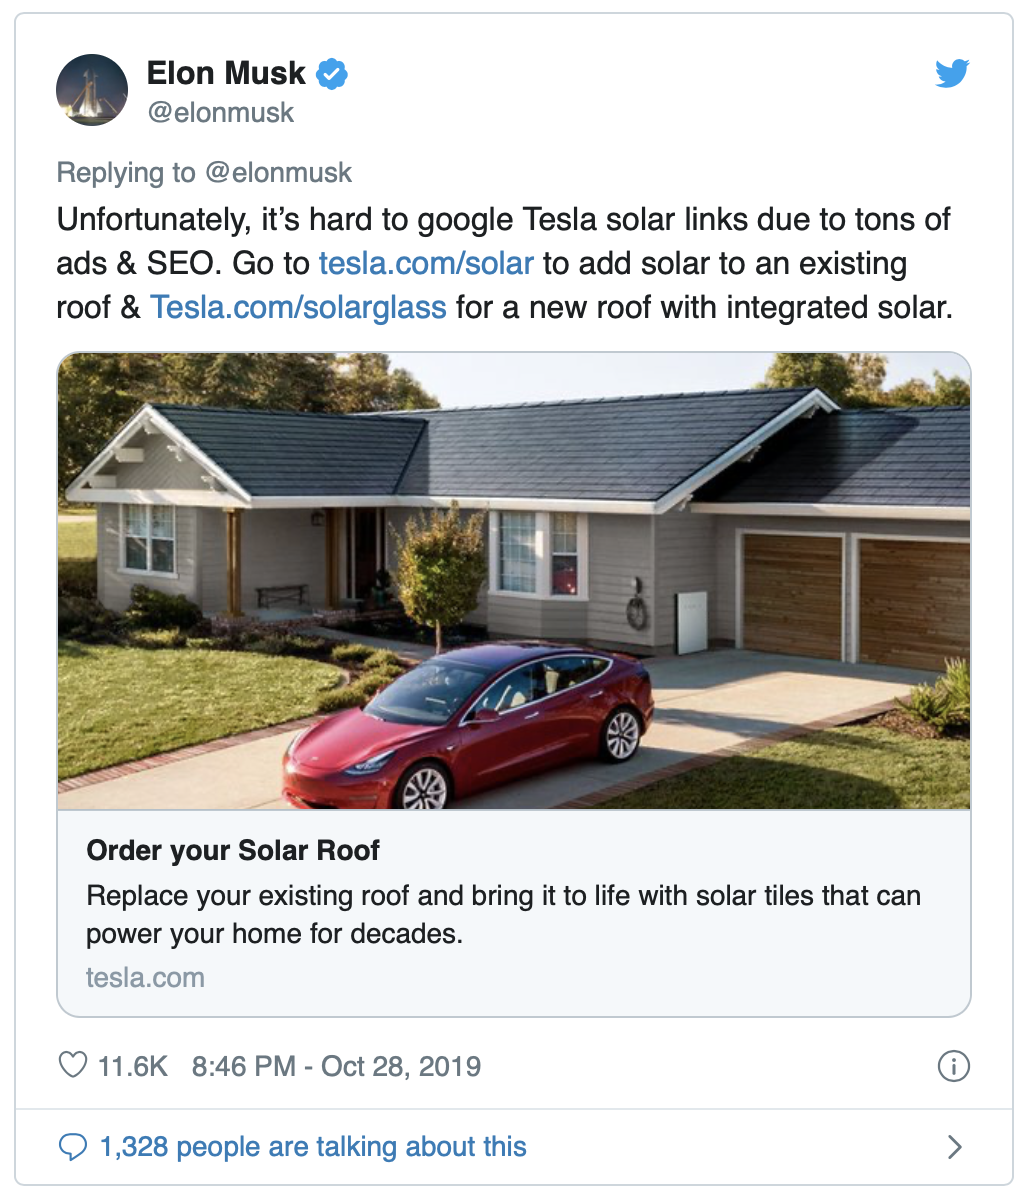 Elon Musk:   Unfortunately, it's hard to google Tesla solar links due to tons of ads & SEO